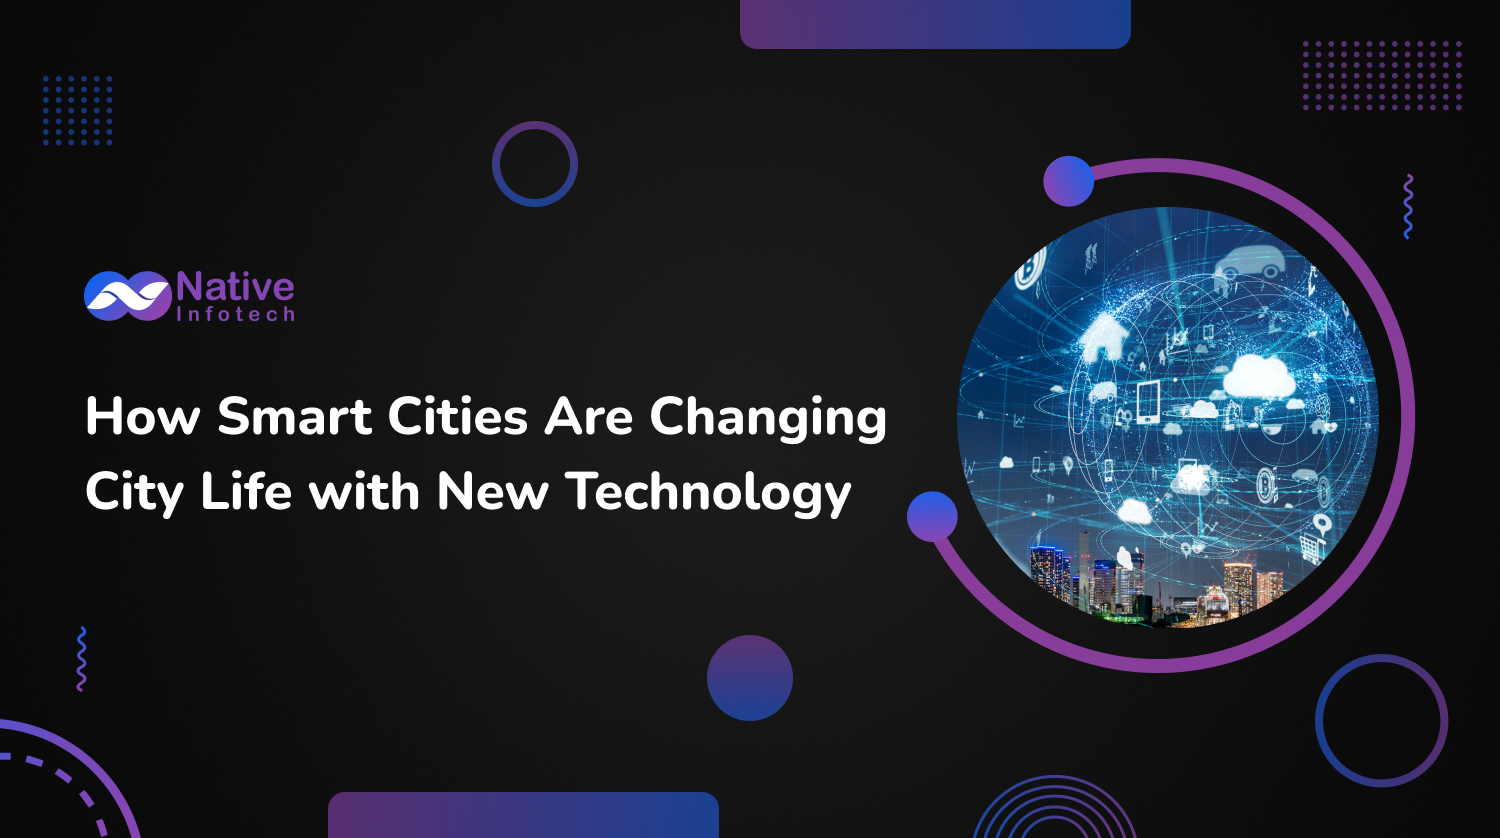 How Smart Cities Are Changing City Life with New Technology | Native Infotech